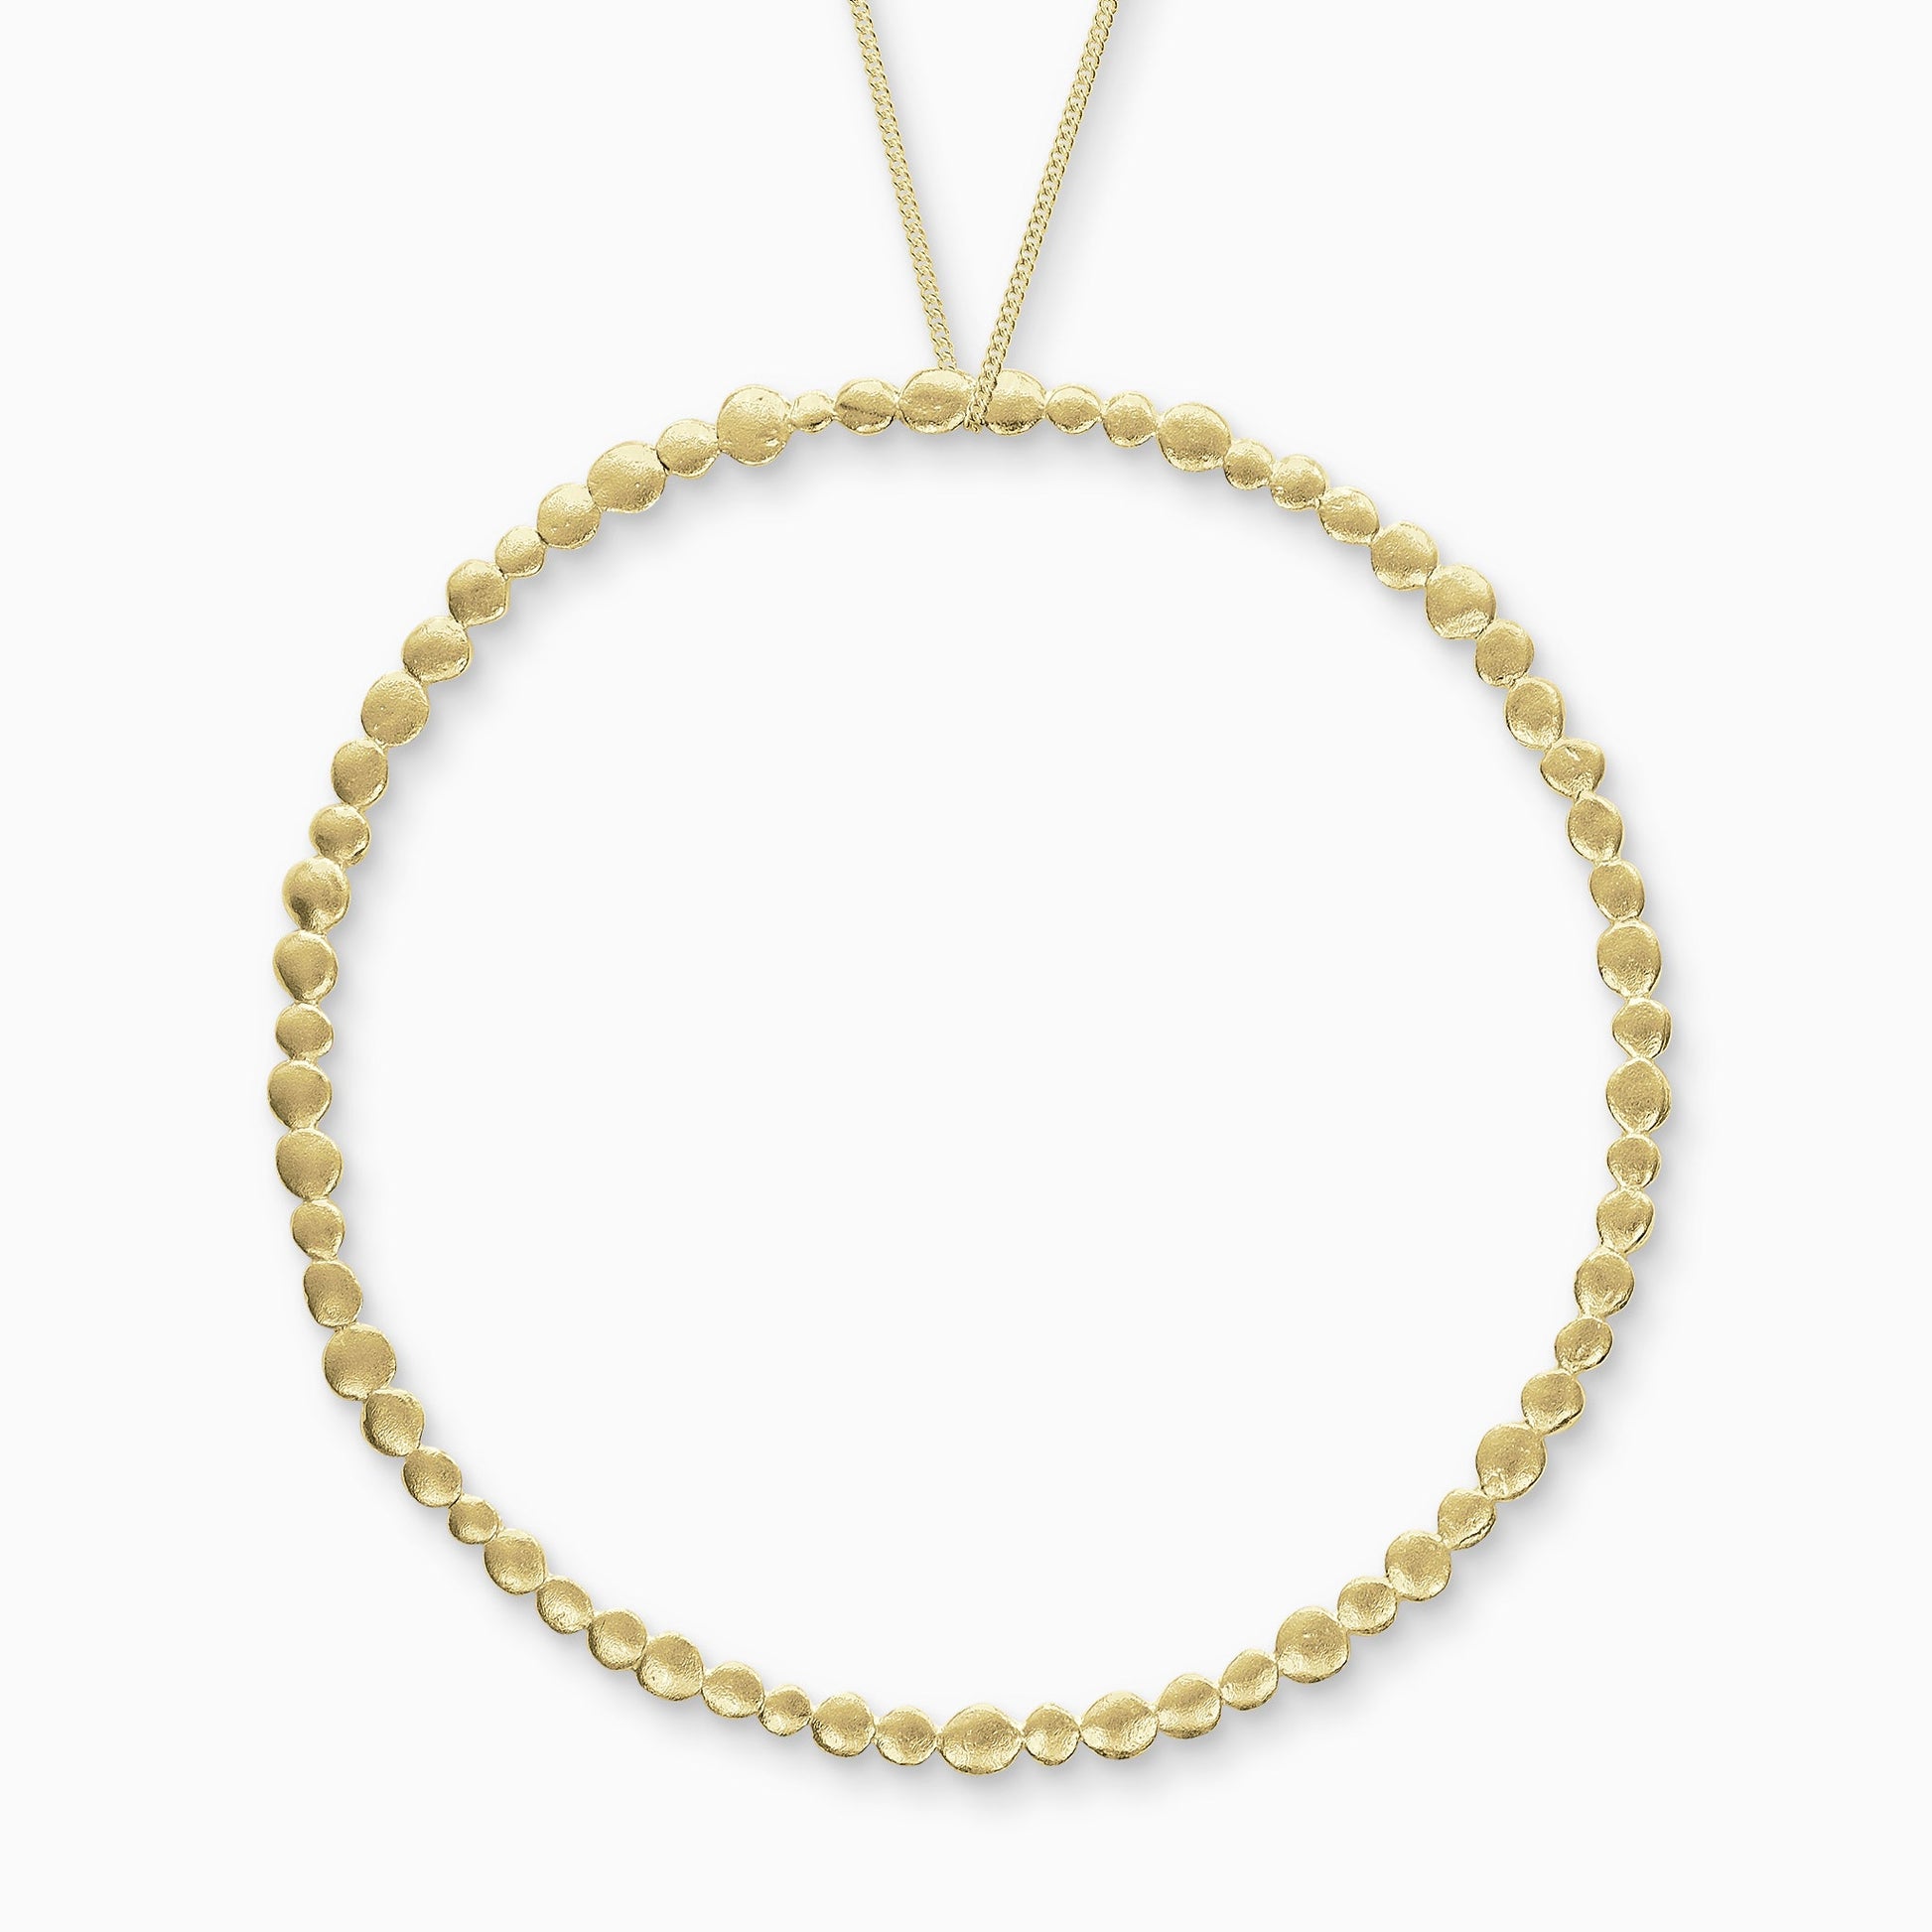 18ct Fairtrade yellow gold pendant. A line of dainty textured dots of gold in varying sizes create a circular pendant 90mm in diameter.